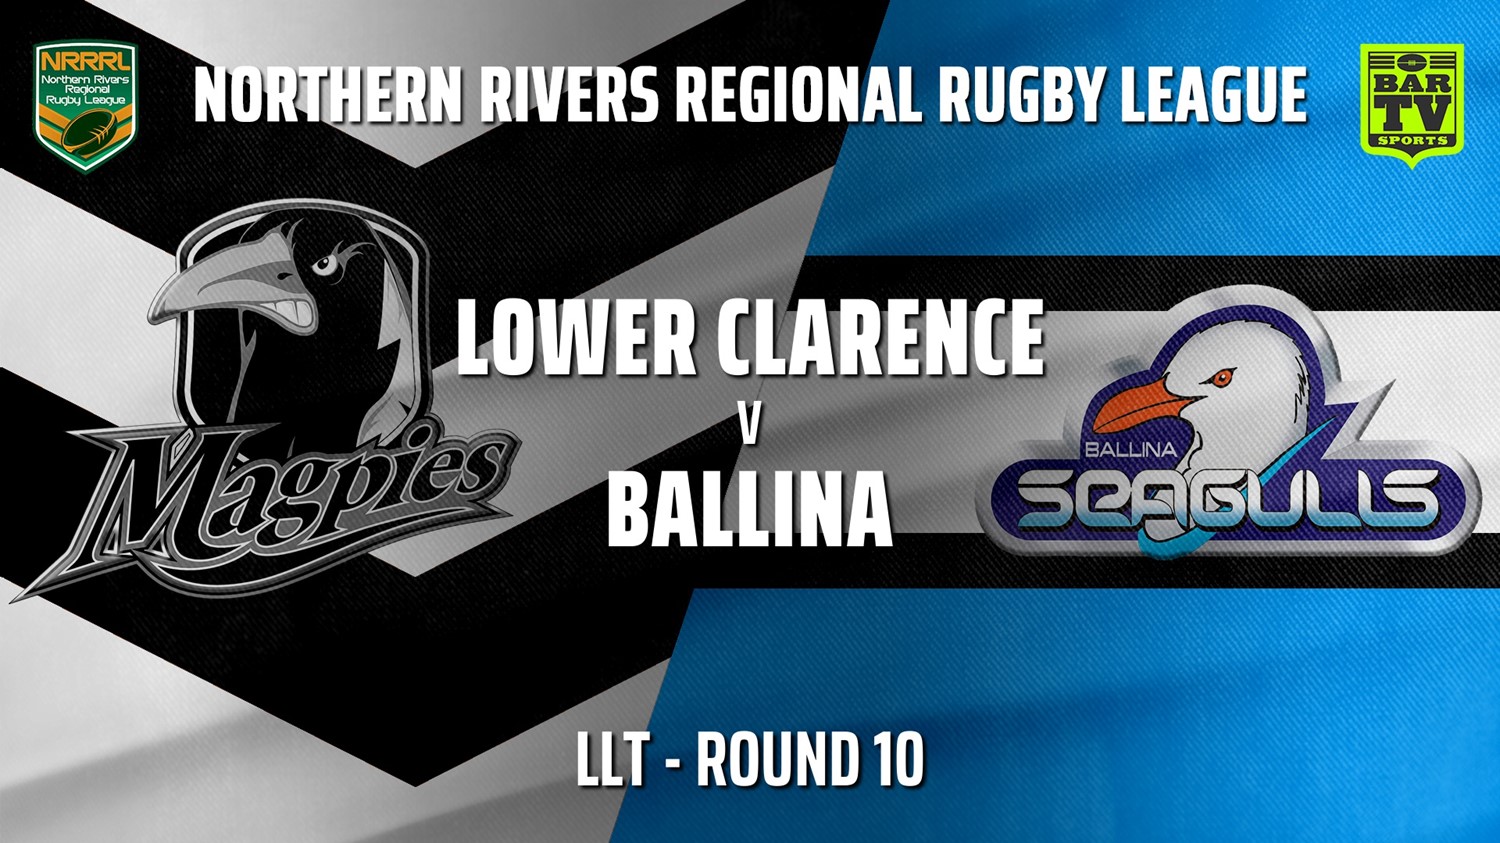 210710-Northern Rivers Round 10 - LLT - Lower Clarence Magpies v Ballina Seagulls Slate Image